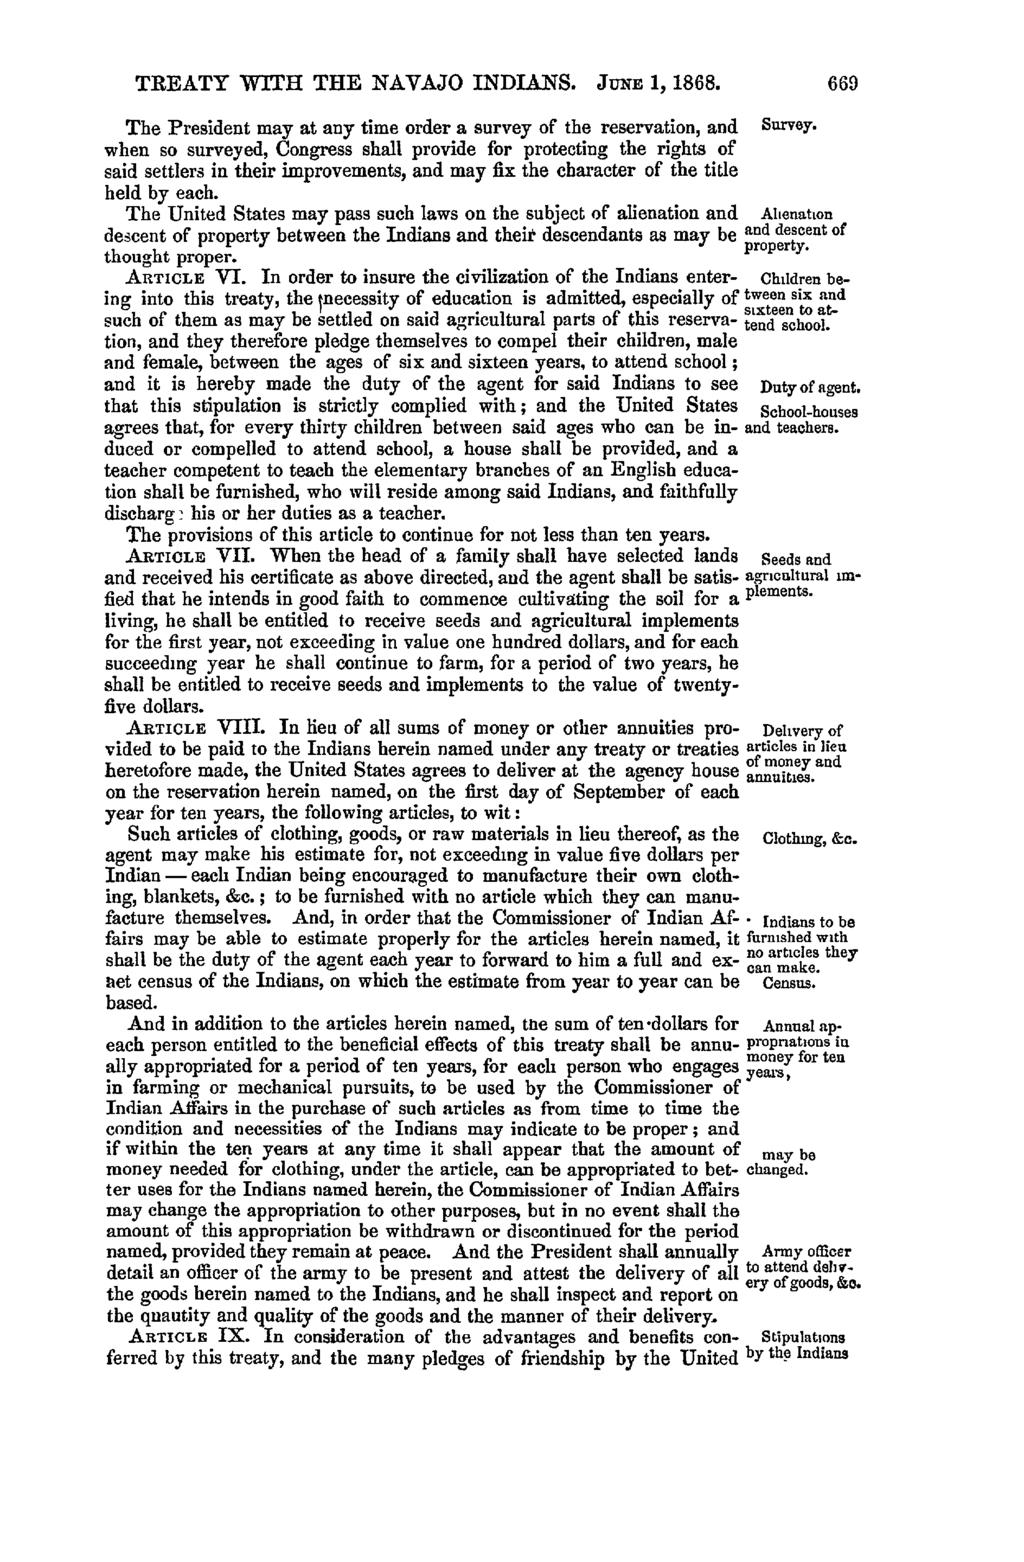 Case: 12-16958 05/15/2013 ID: 8630738 DktEntry: 9-3 Page: 73 of 99 TREATY WITH THE NAVAJO INDIANS. JuN 1, 1868. The President may at any time order a survey of the reservation, and Survey.